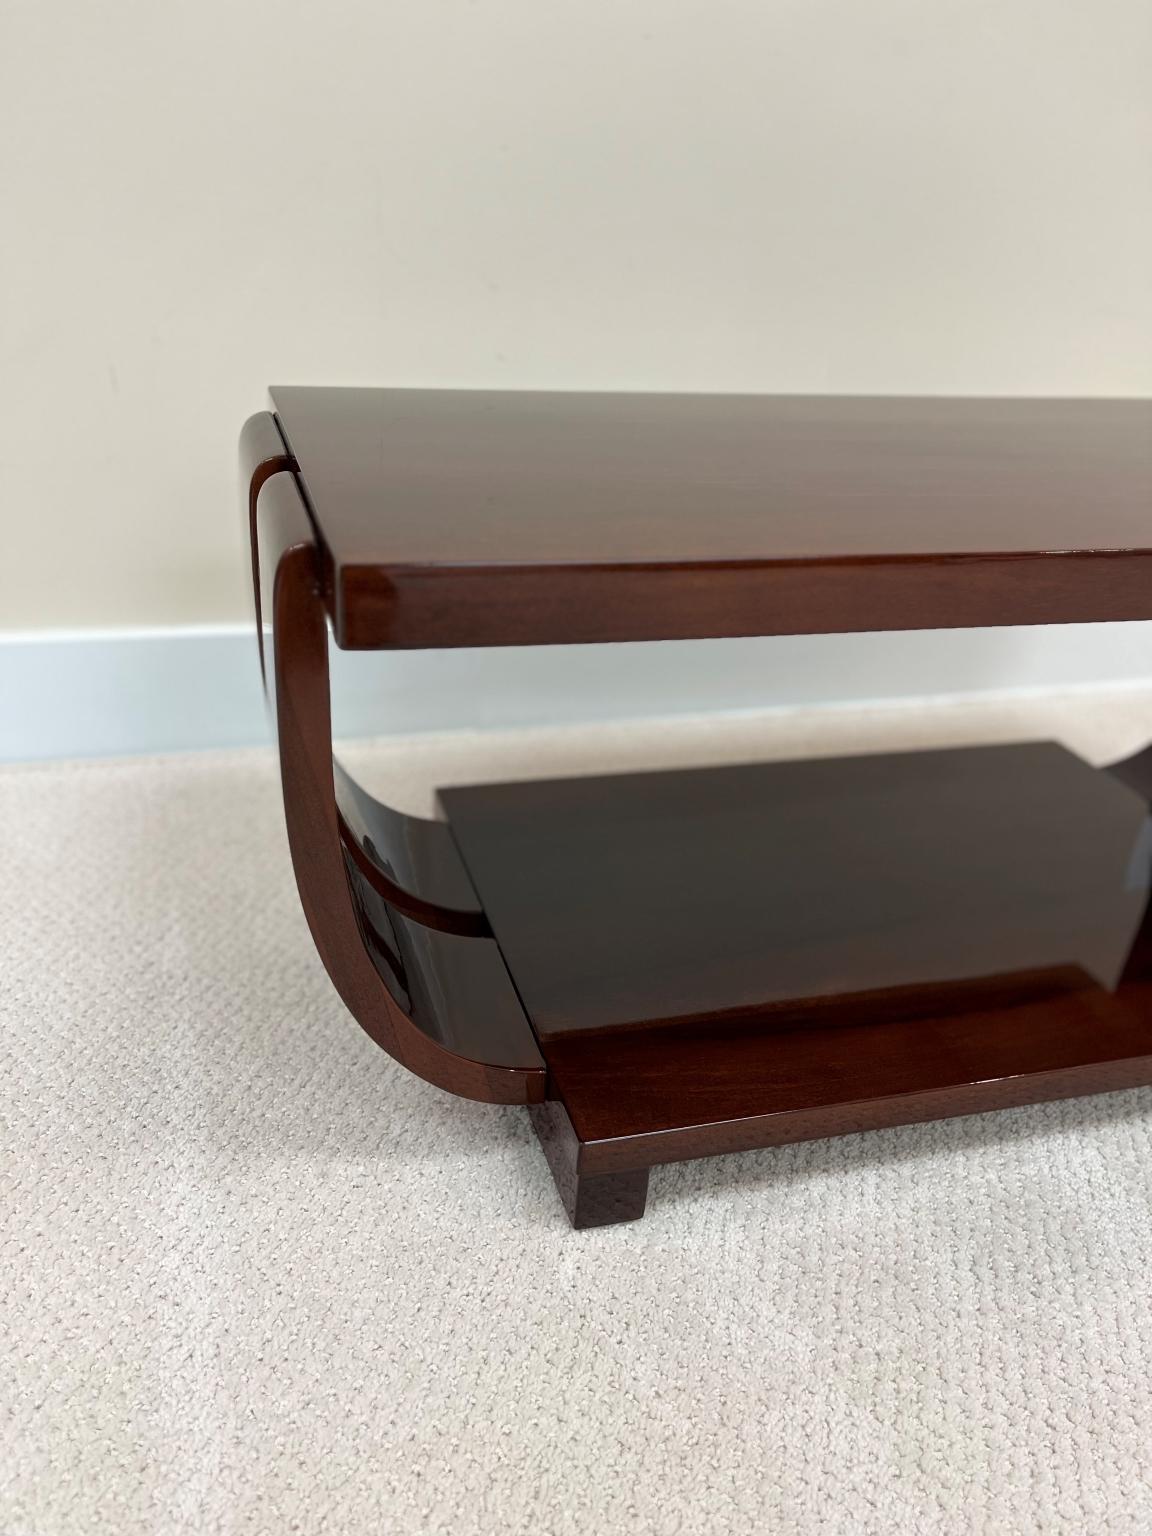 American Art Deco Streamline Cocktail Table by Modern Age Furniture Company C.1930’s For Sale